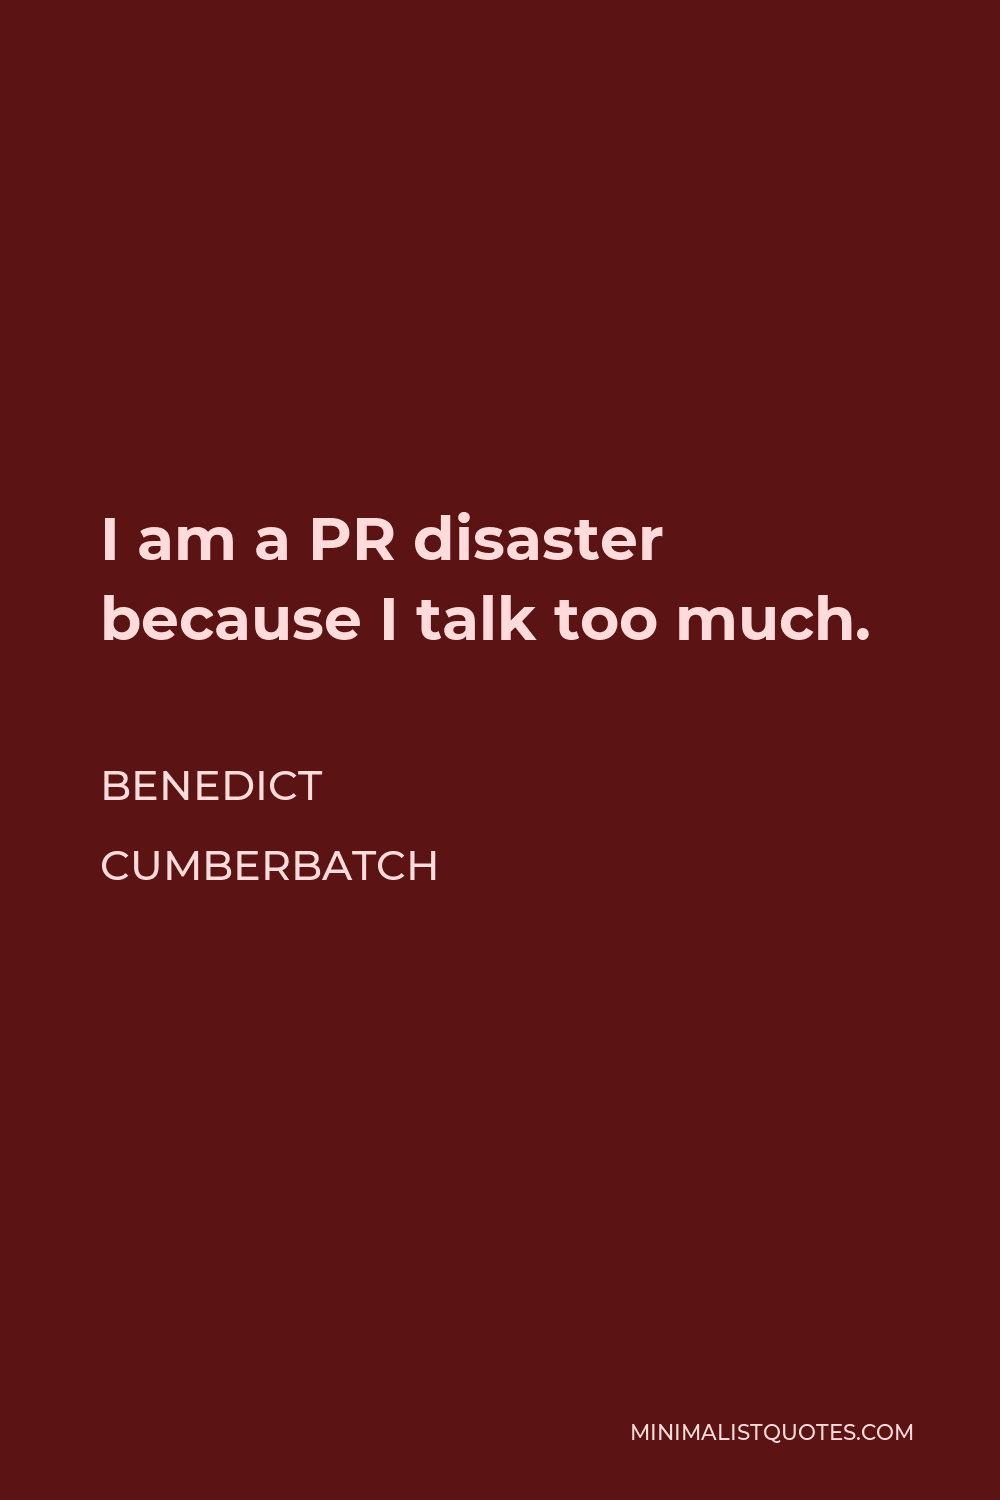 Benedict Cumberbatch Quote - I am a PR disaster because I talk too much.